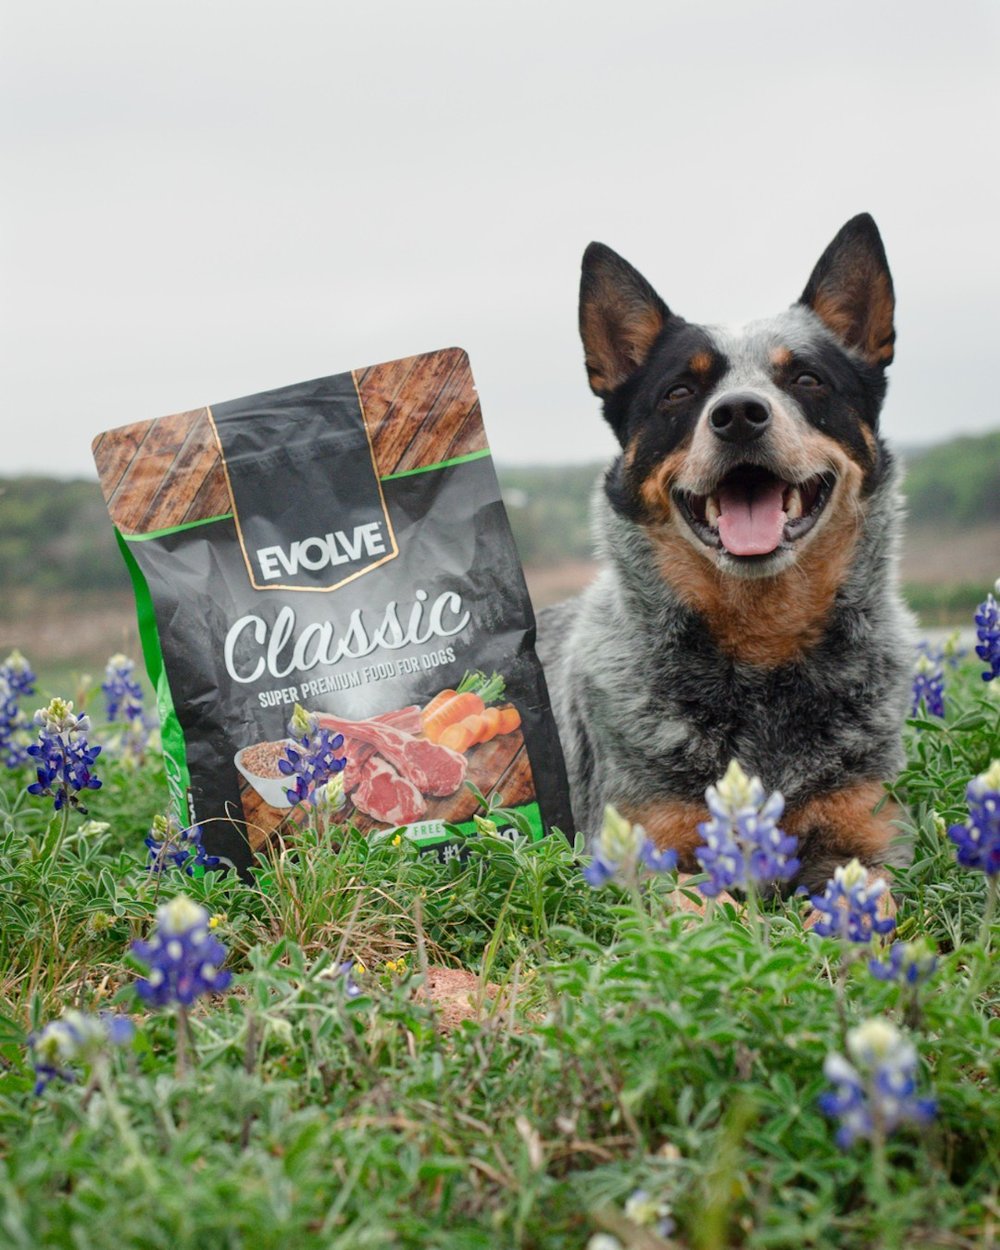 Evolve Pawtner @cleotheheeler is living his best life and enjoying his favorite food! Our Classic Lamb and Brown Rice Recipe #1 ingredient is Deboned Lamb powered by superfoods like Carrots 🥕, Apples 🍎, Cranberries, Pumpkin, Zucchini 🥒, Turmeric, 